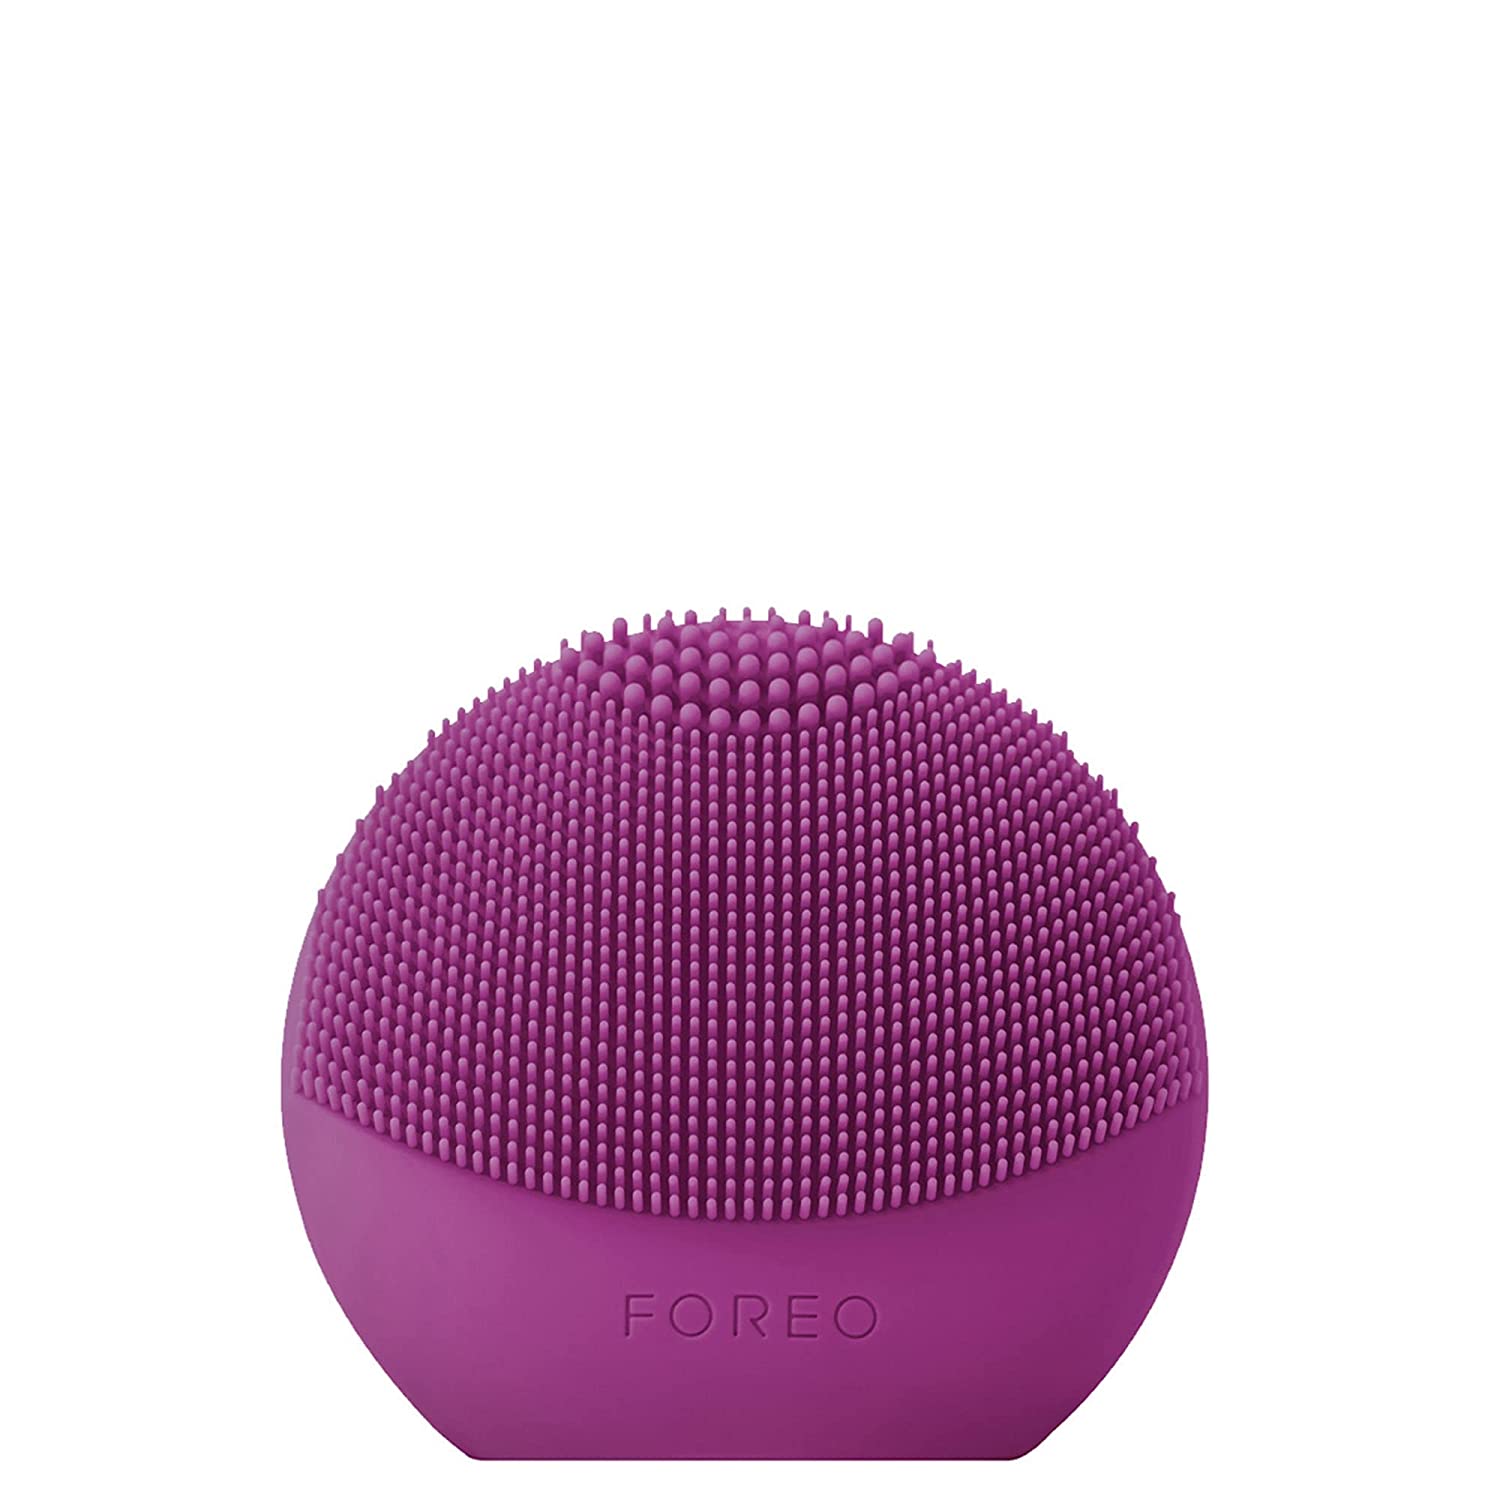 Foreo LUNA Smart Facial Cleansing Brush and Skin Analyzer